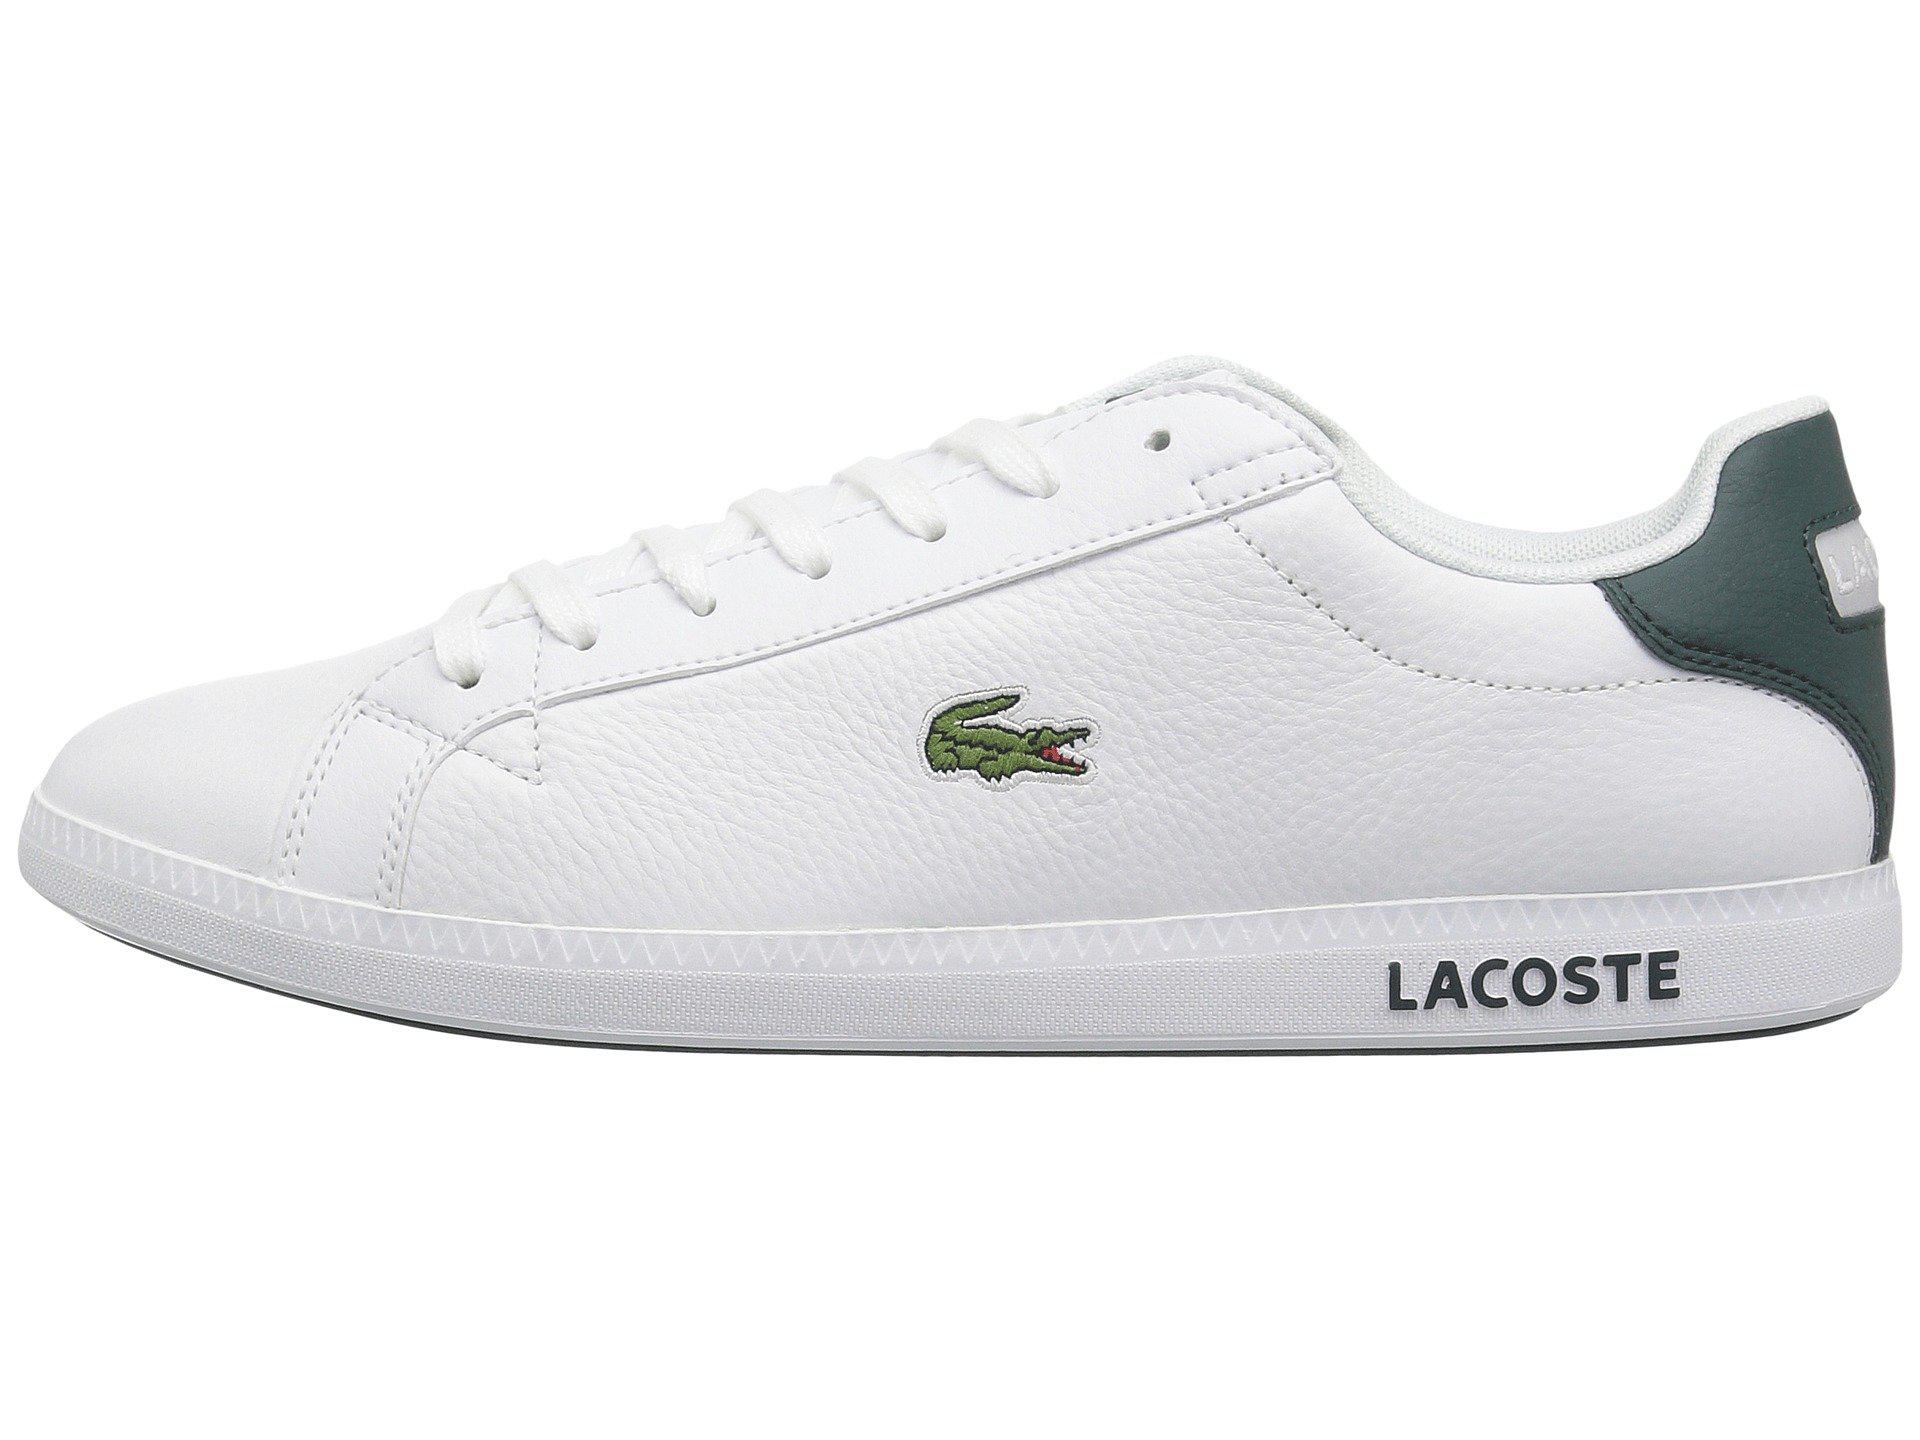 dør spejl Wedge Justering Lcr3 Lacoste Store - www.puzzlewood.net 1695570233